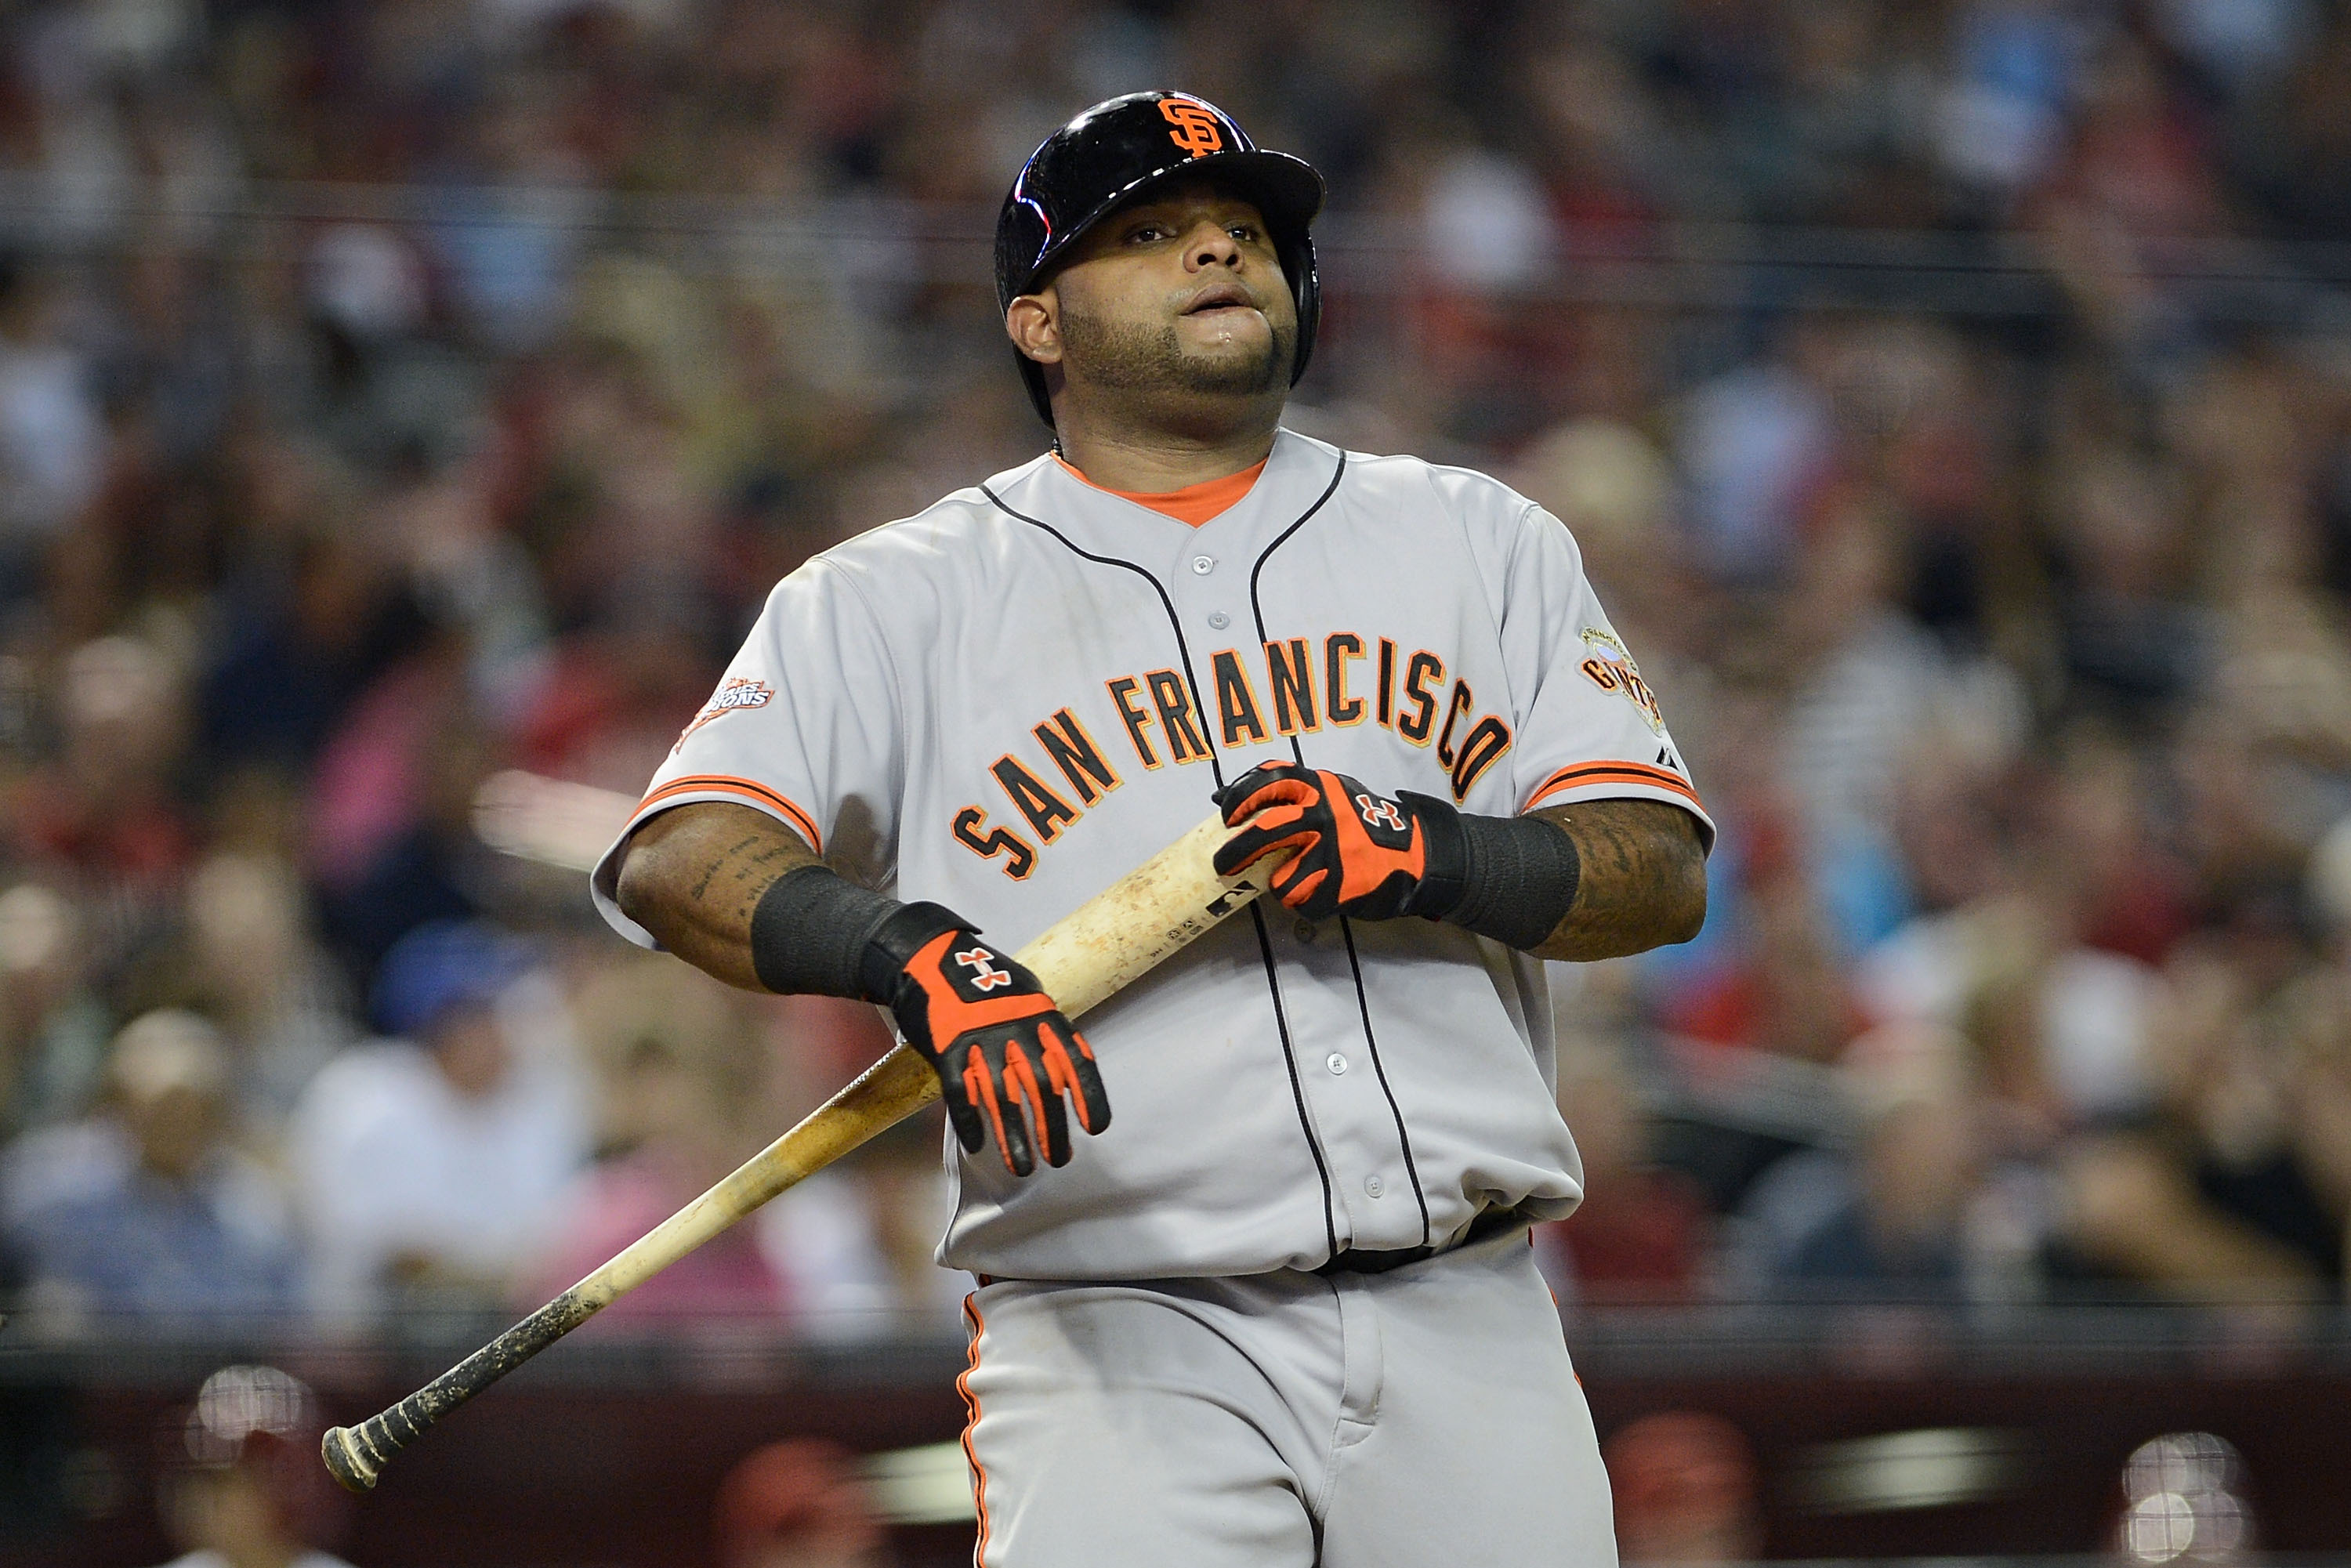 Pablo Sandoval of the Giants Is Loved but Benched - The New York Times